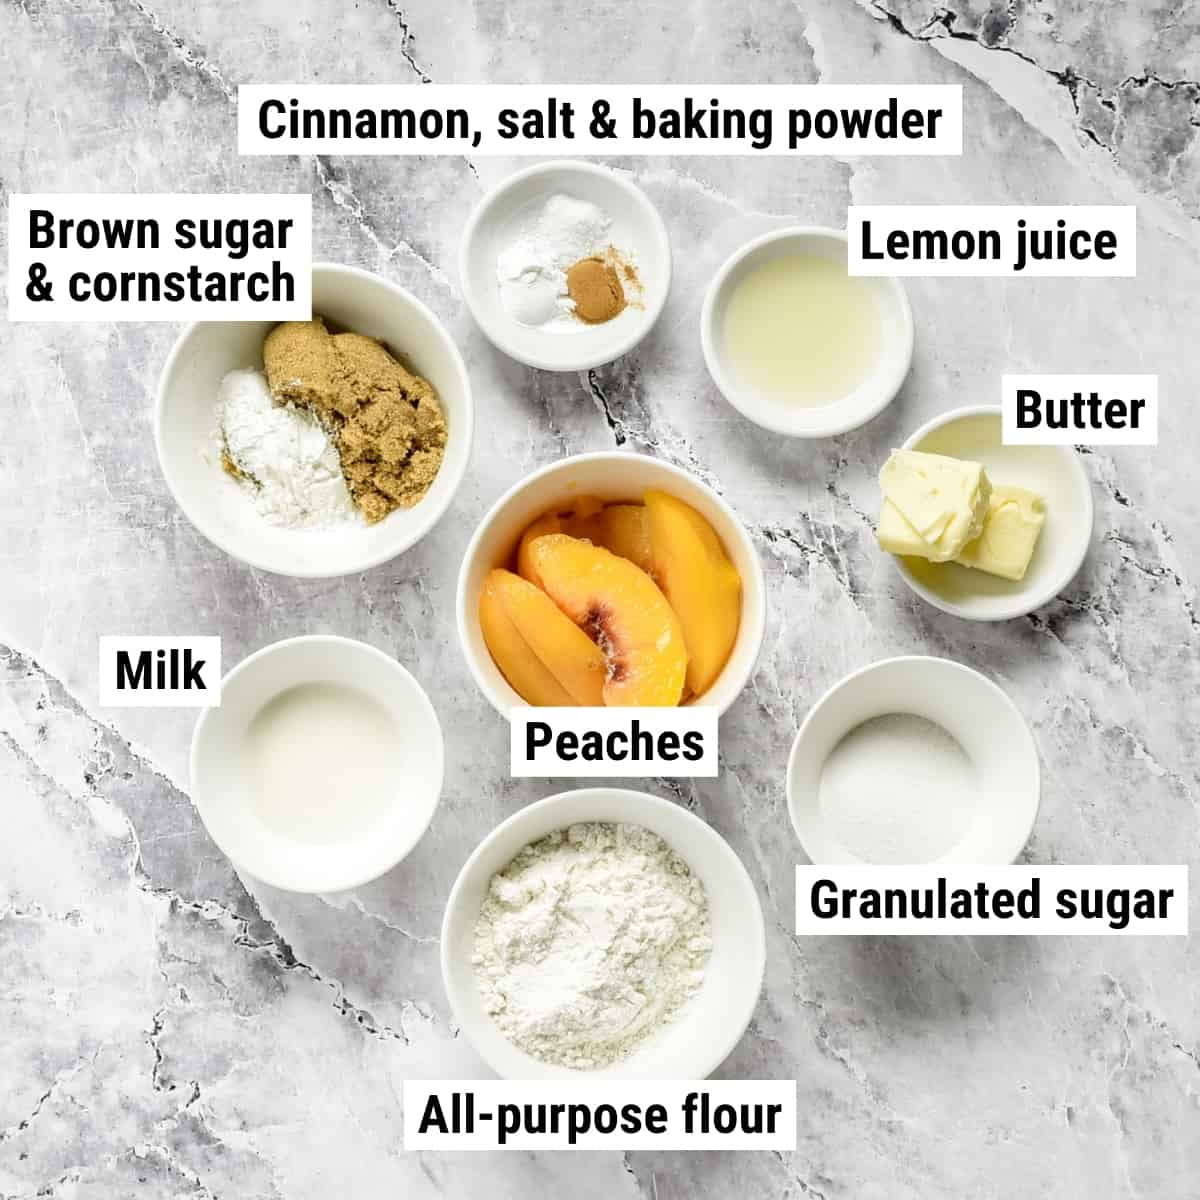 The ingredients to make peach cobbler laid out on a table.